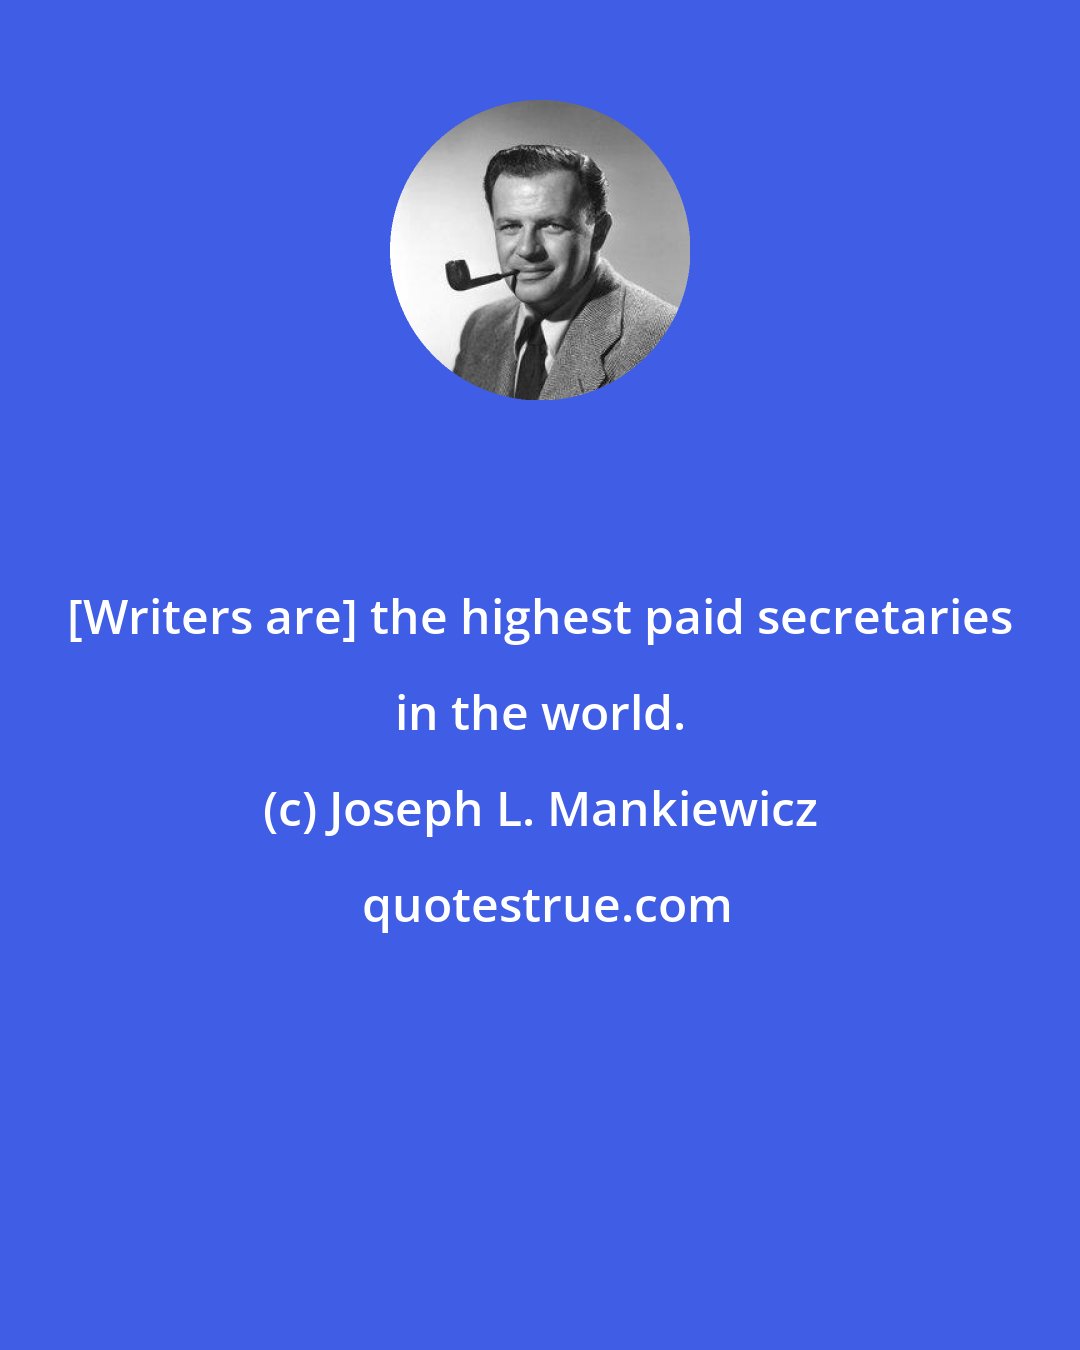 Joseph L. Mankiewicz: [Writers are] the highest paid secretaries in the world.